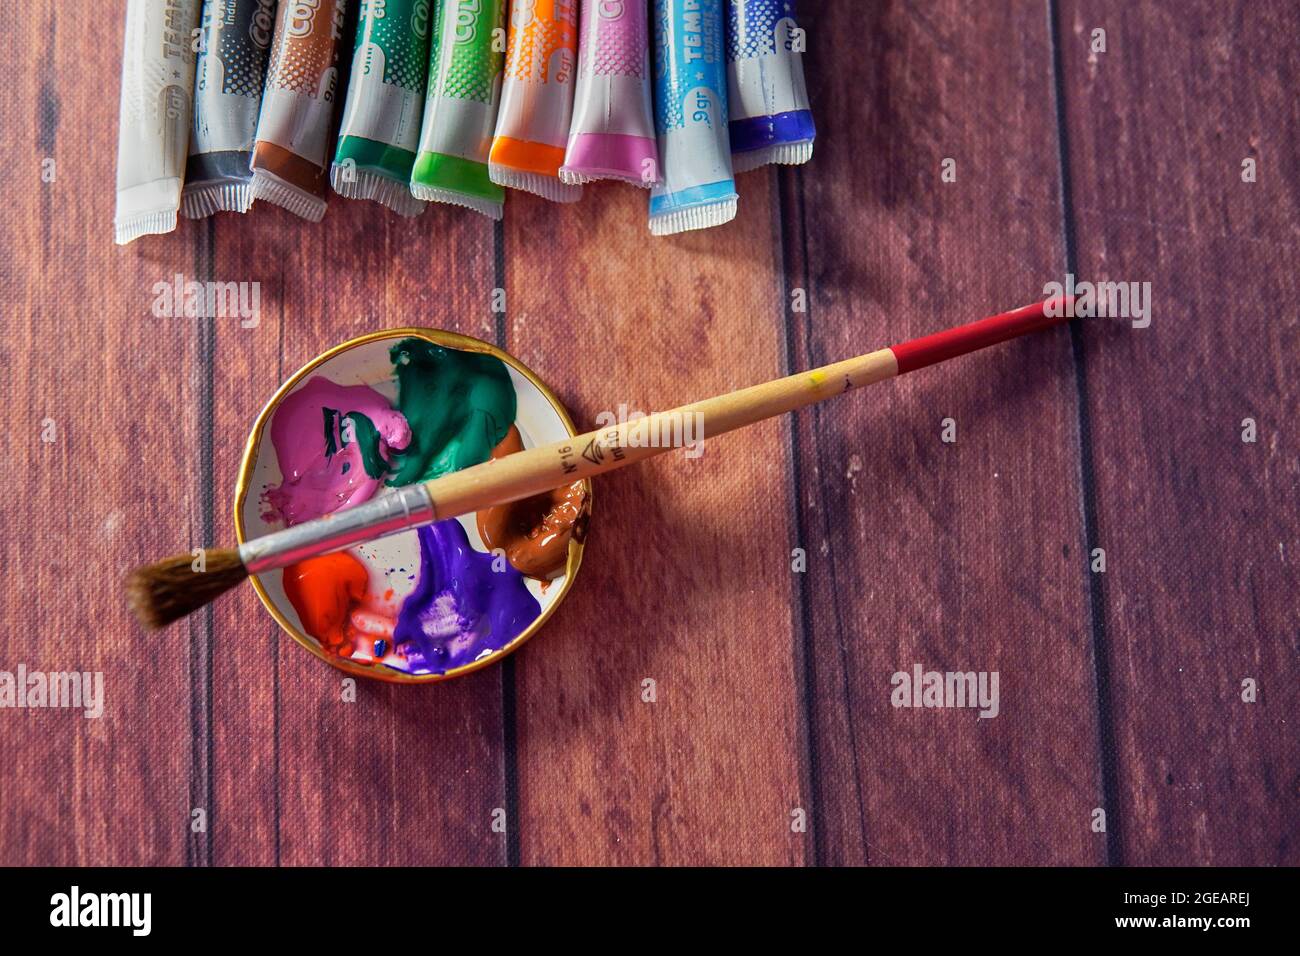 A collection of well used art paint brushes with a highly colourful  abstract artwork as a background Stock Photo - Alamy